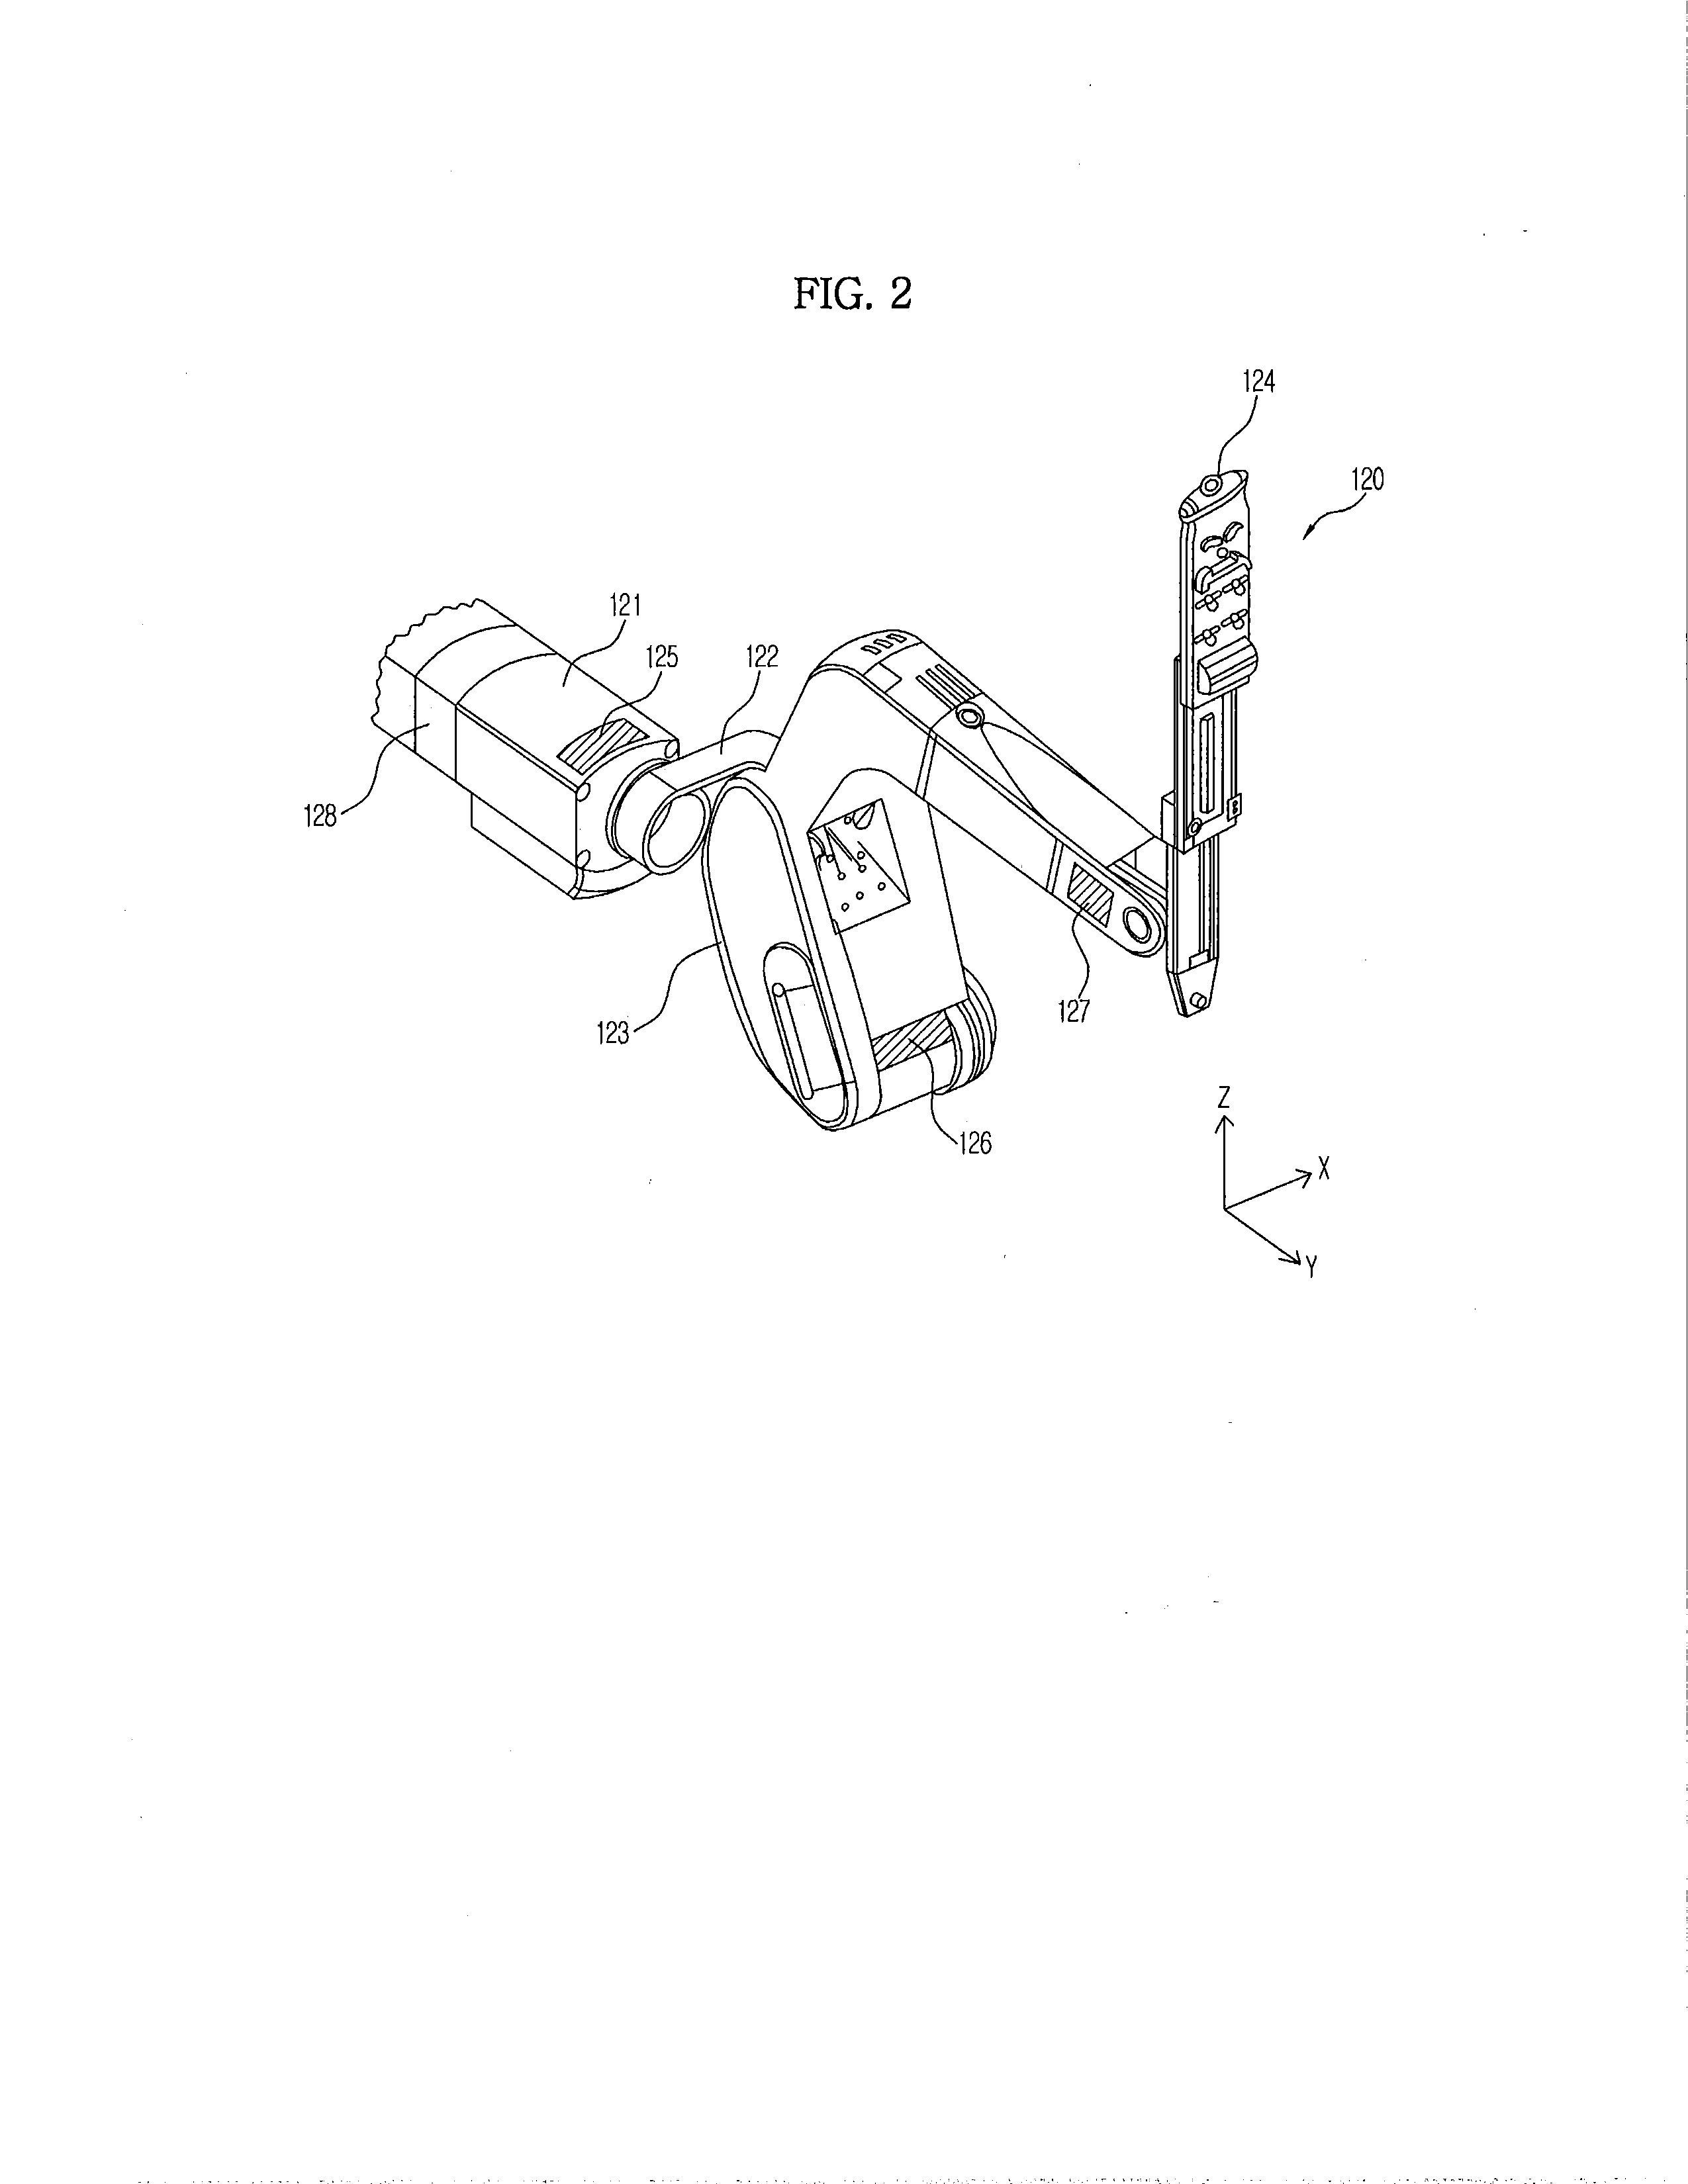 Surgical robot and method for controlling the same